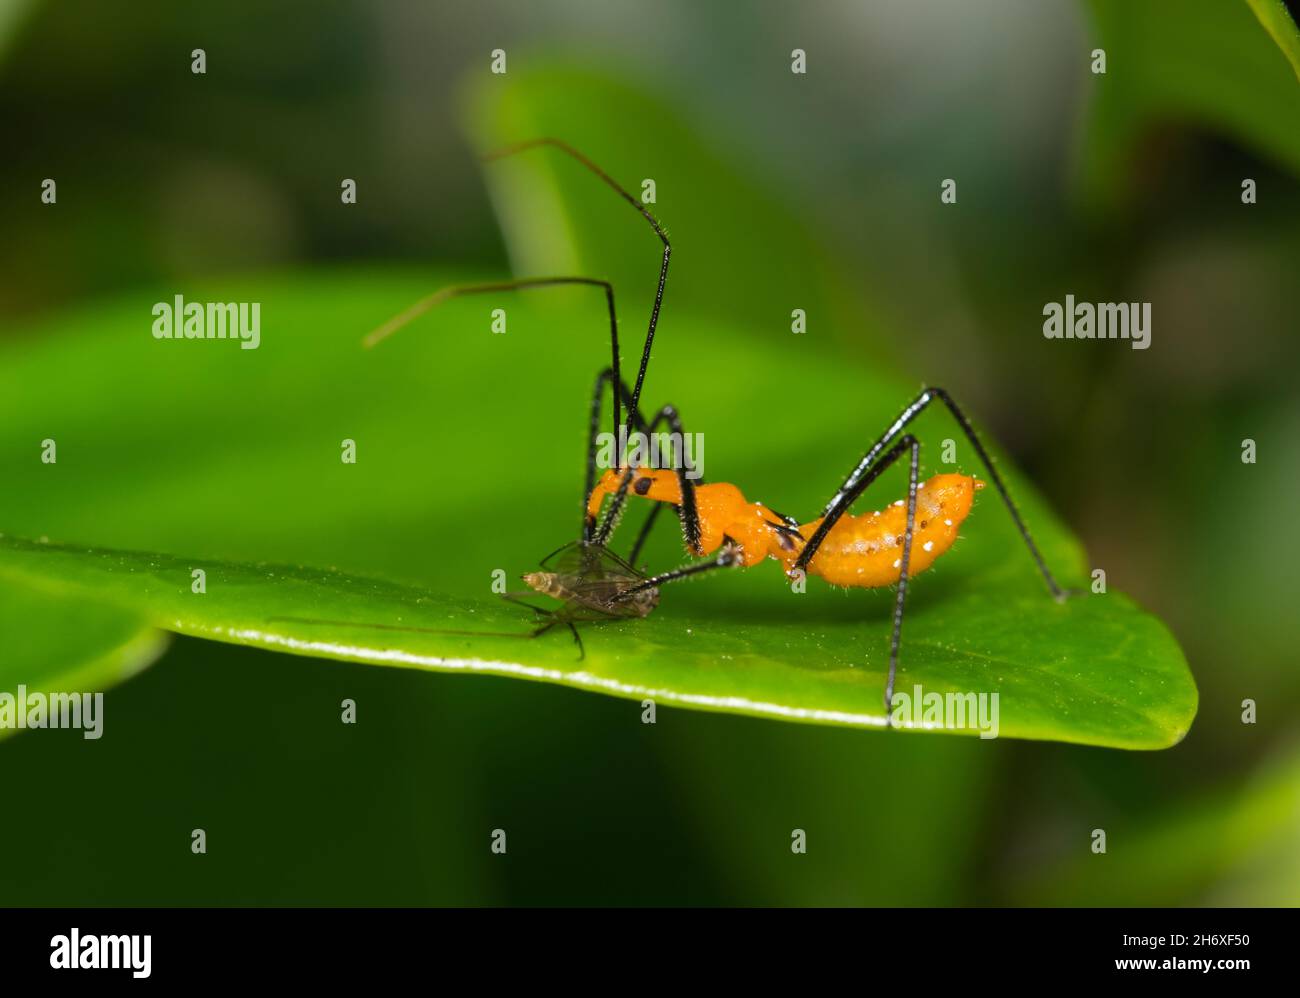 Milkweed assassin bug nymph (Zelus longipes Linnaeus) feeding on mosquito prey on a leaf, ventral view. Stock Photo